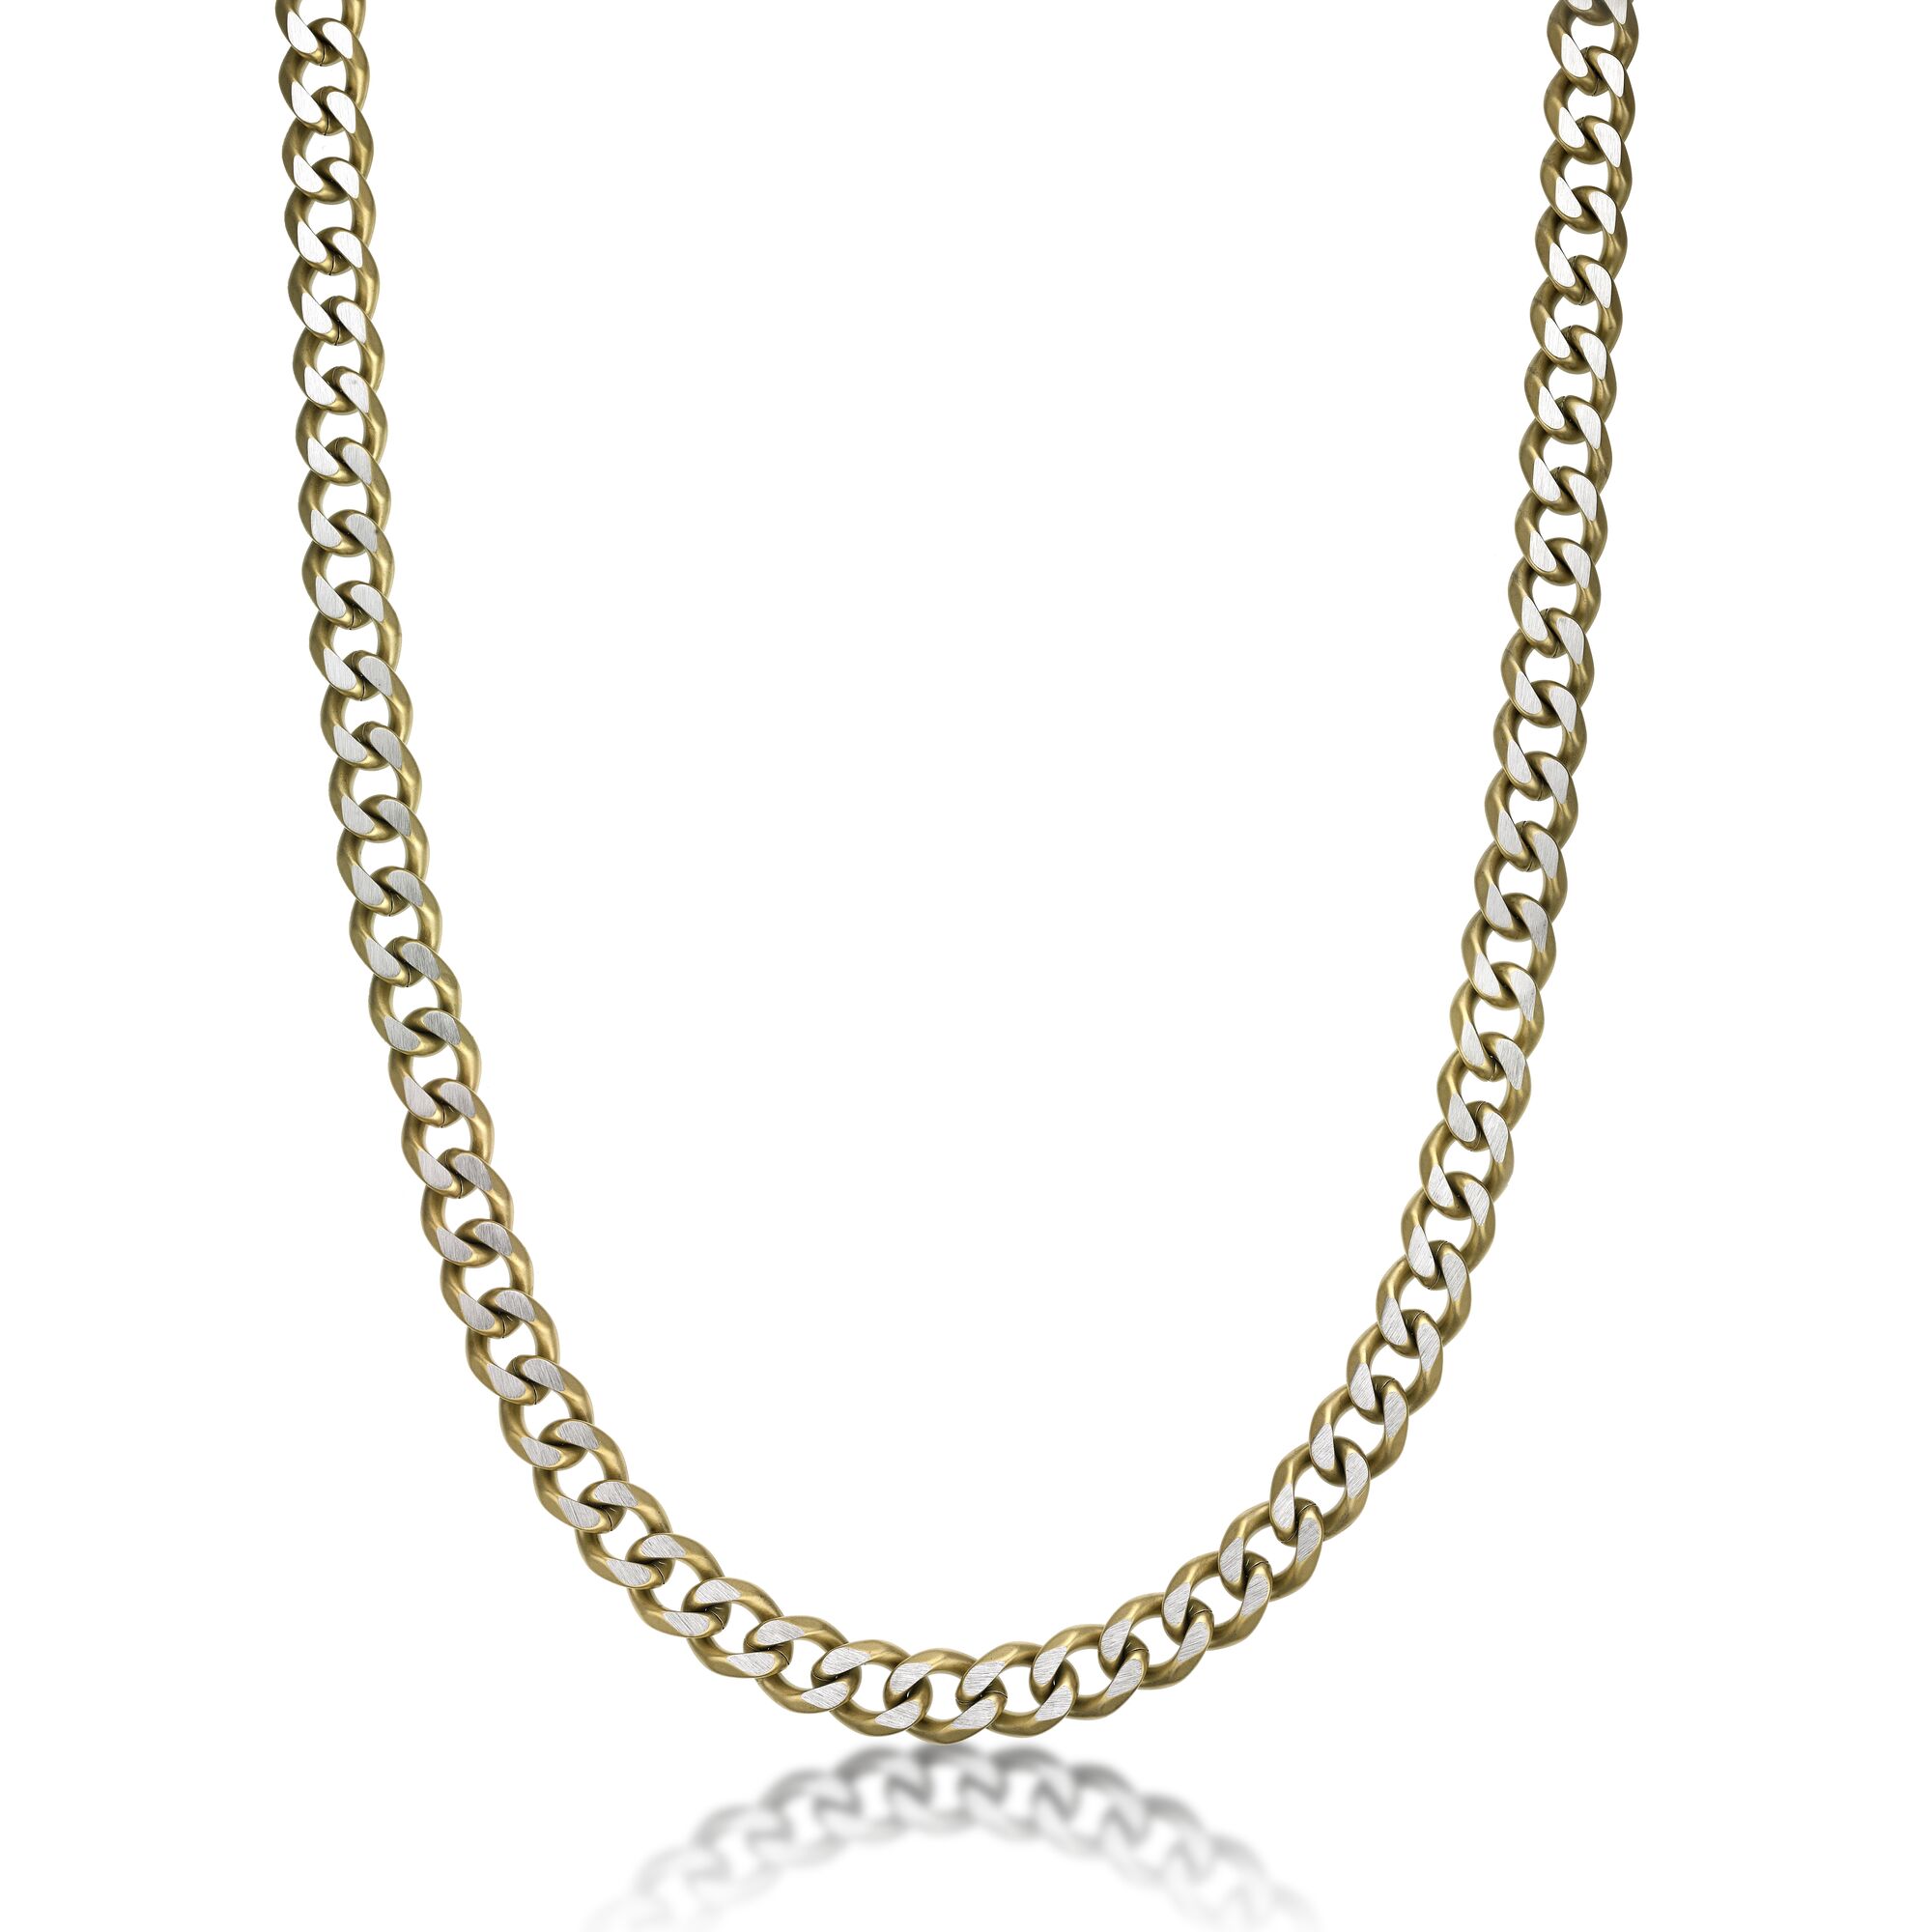 45892-necklace-default-collection-stainless-steel-.jpg